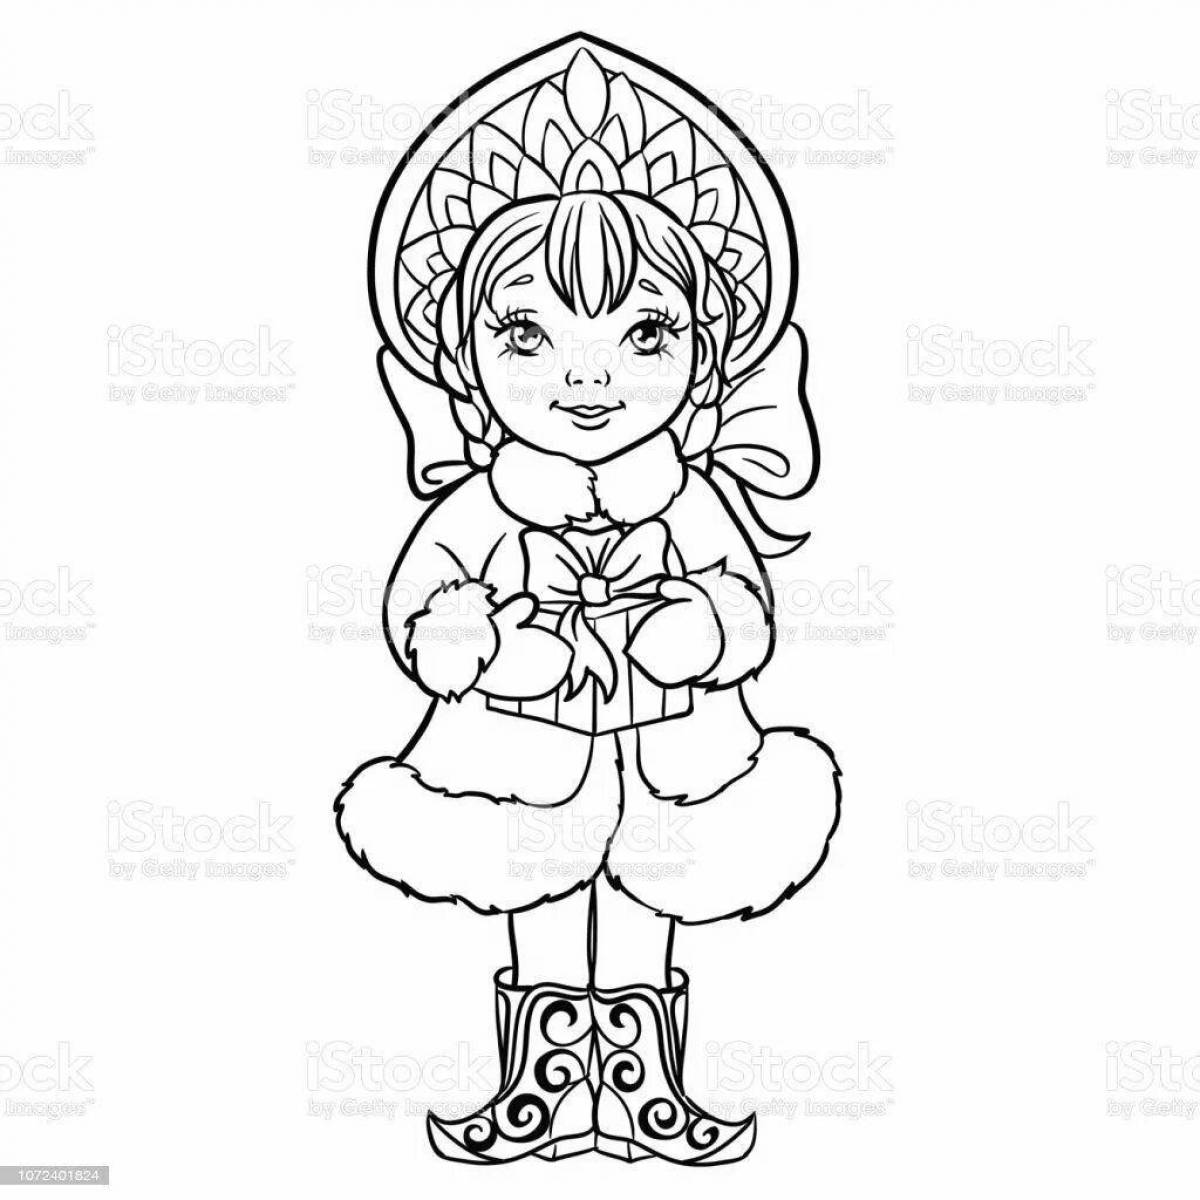 Coloring page dazzling face of snow maiden